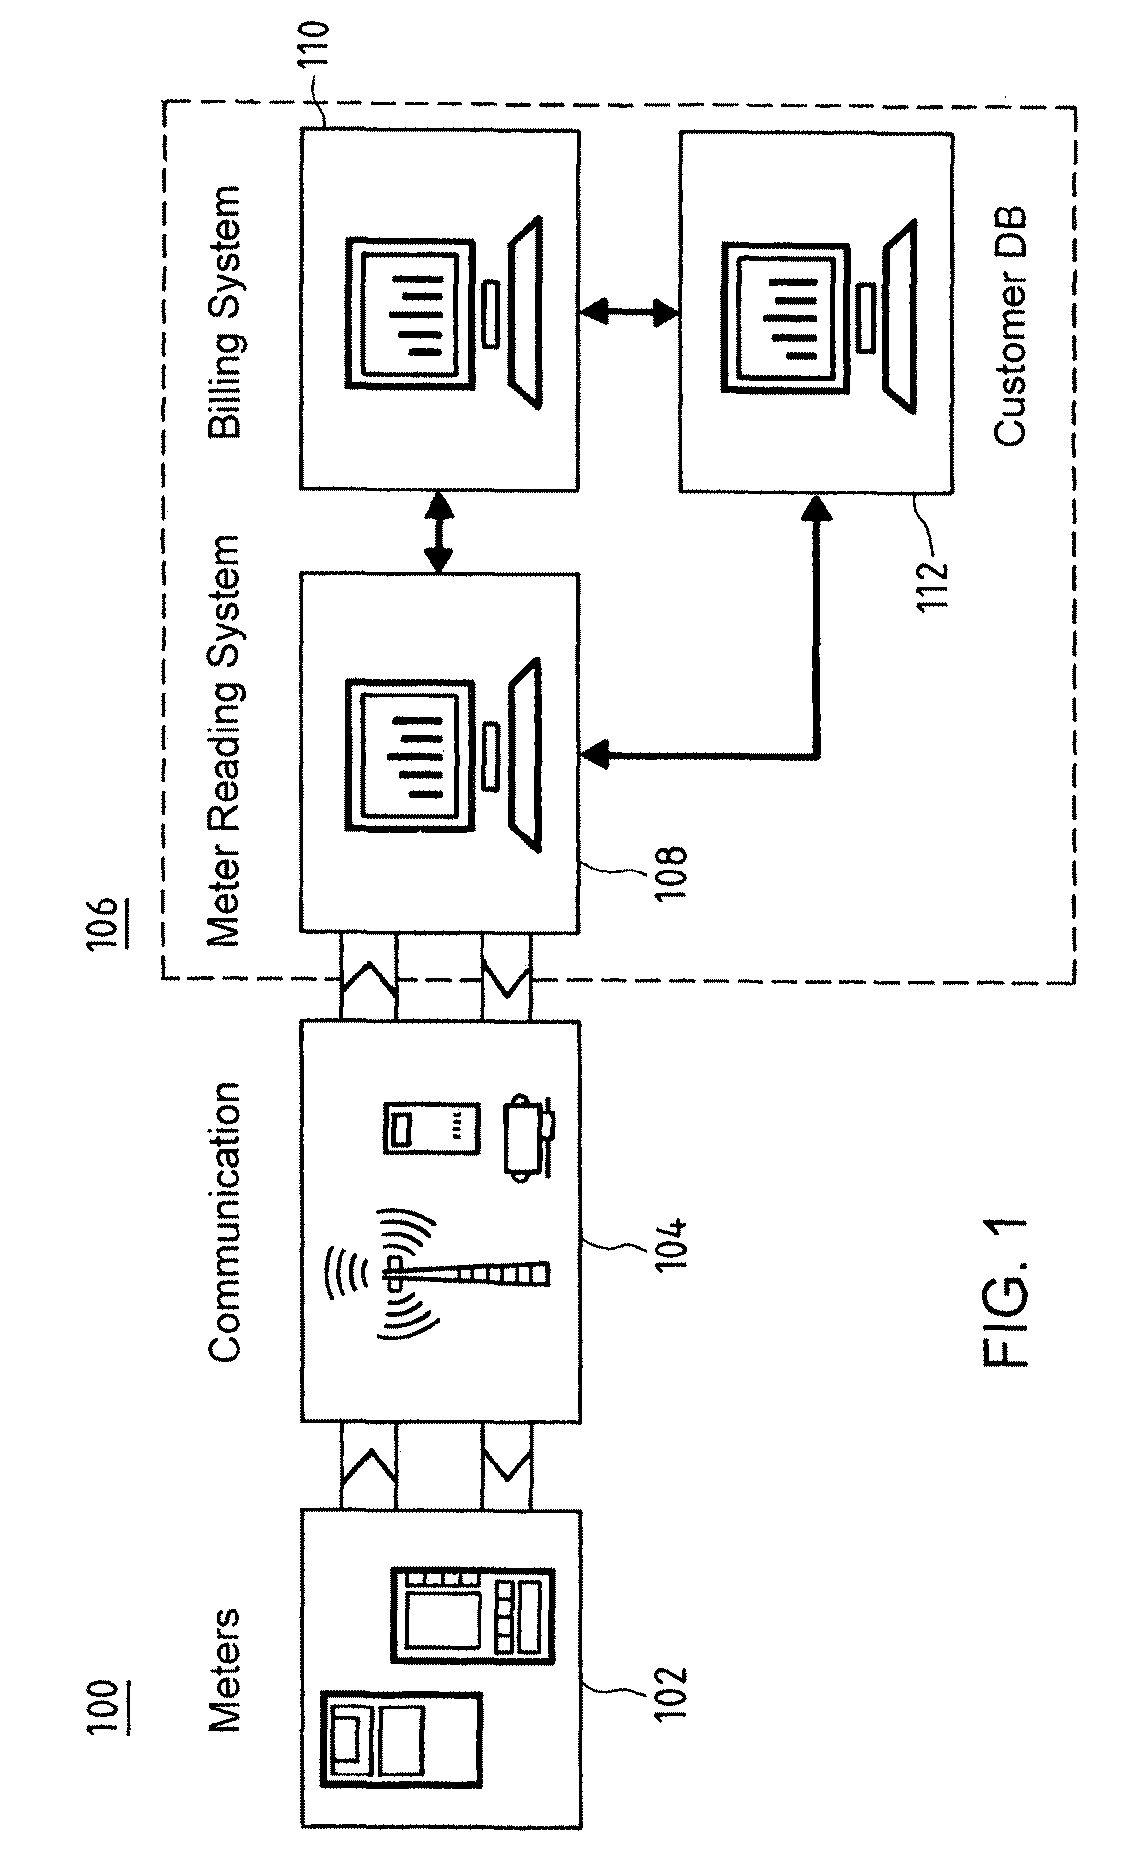 Device, arrangement and method for verifying the operation of electricity meter